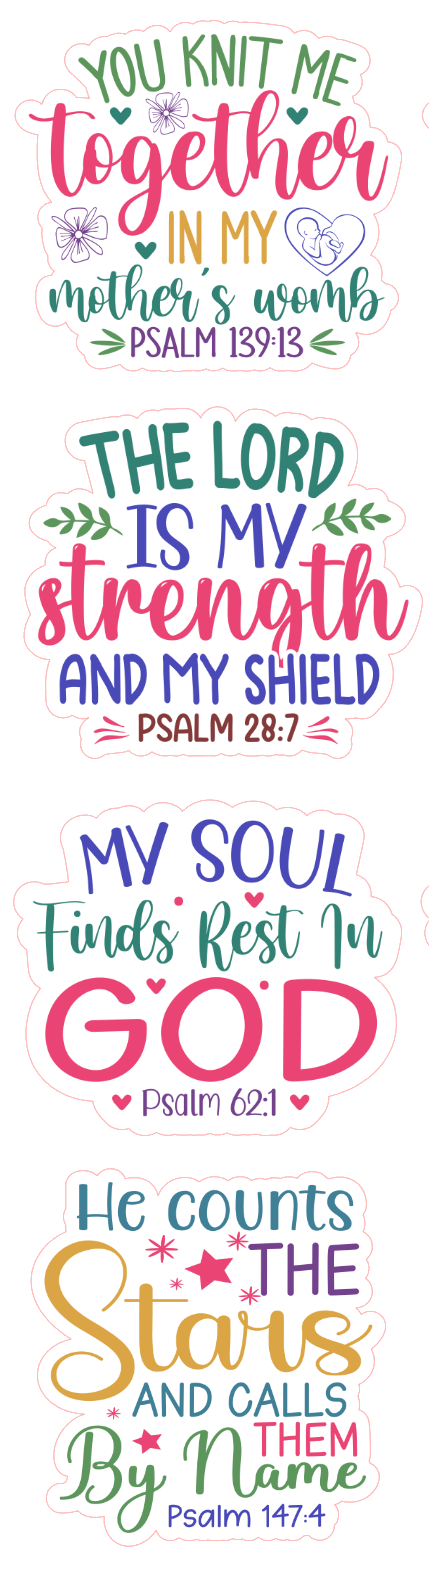 Bible verse quotes stickers